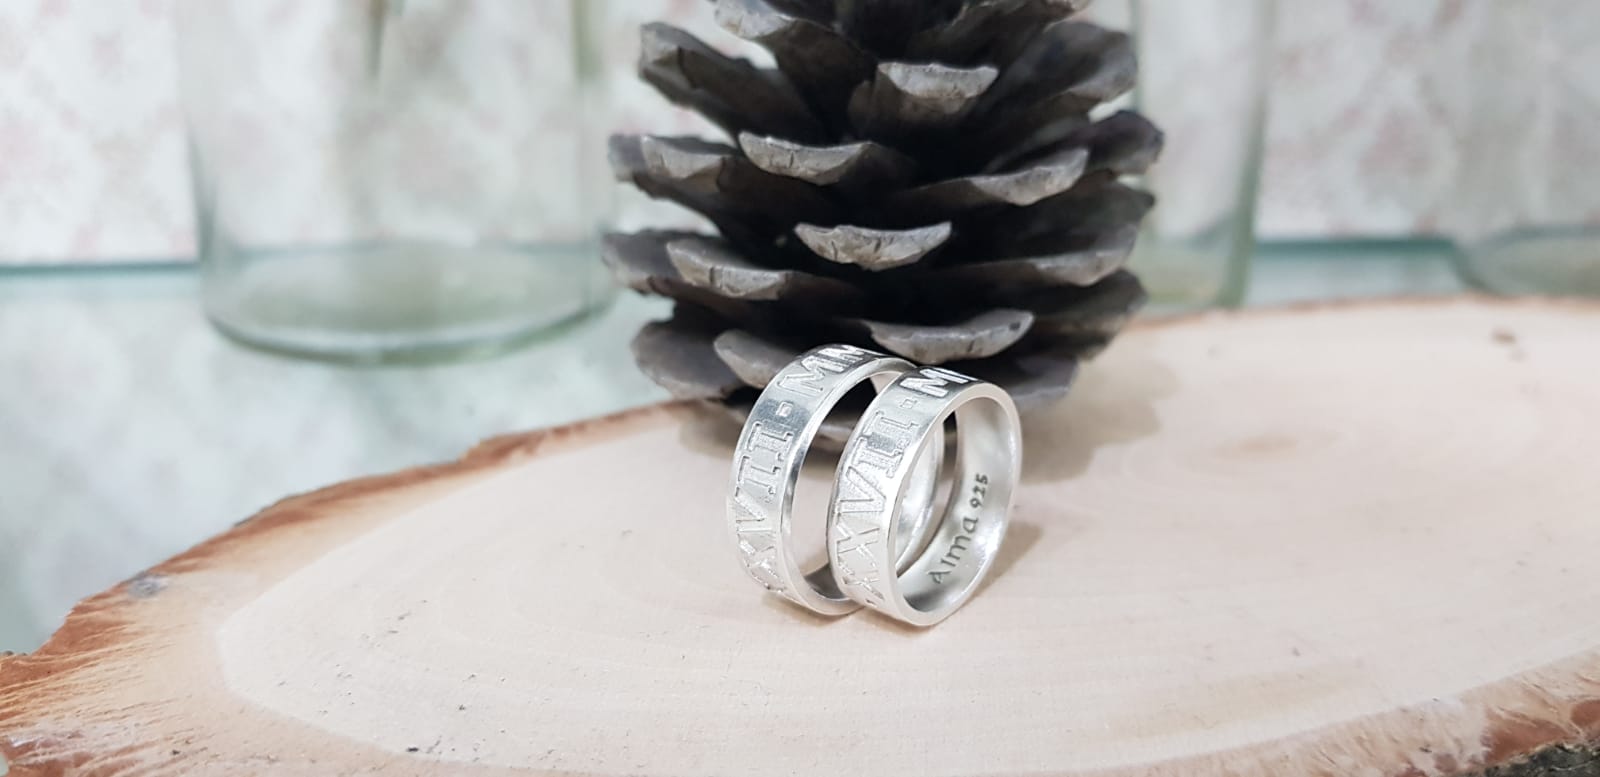 couples ring set | Promise Rings For Couples, His and Her Promise Rings, Couples Jewelry, Couple Ring Set, Promise Ring, Silver Ring, Promise Ring Set - AlmaJewelryShop Online boutique for gold and silver jewelry 